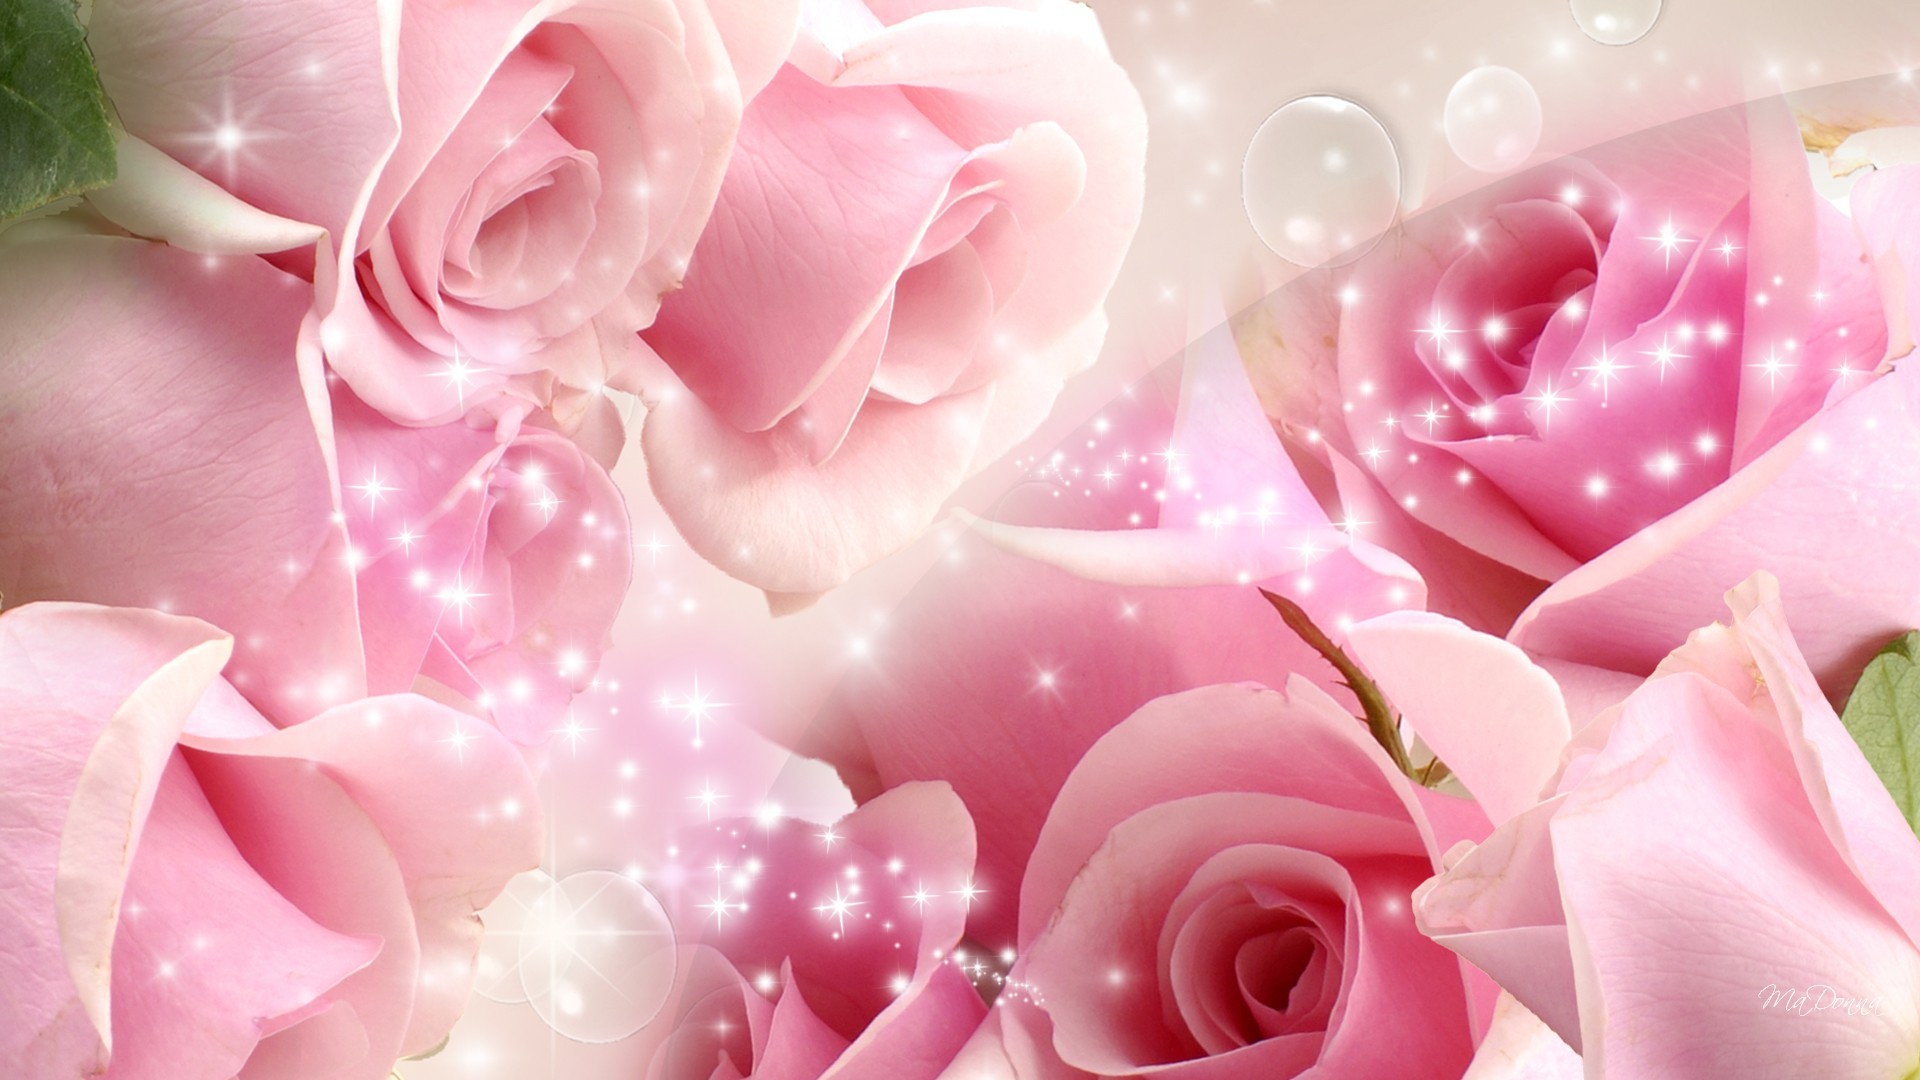 2100+ Rose HD Wallpapers and Backgrounds